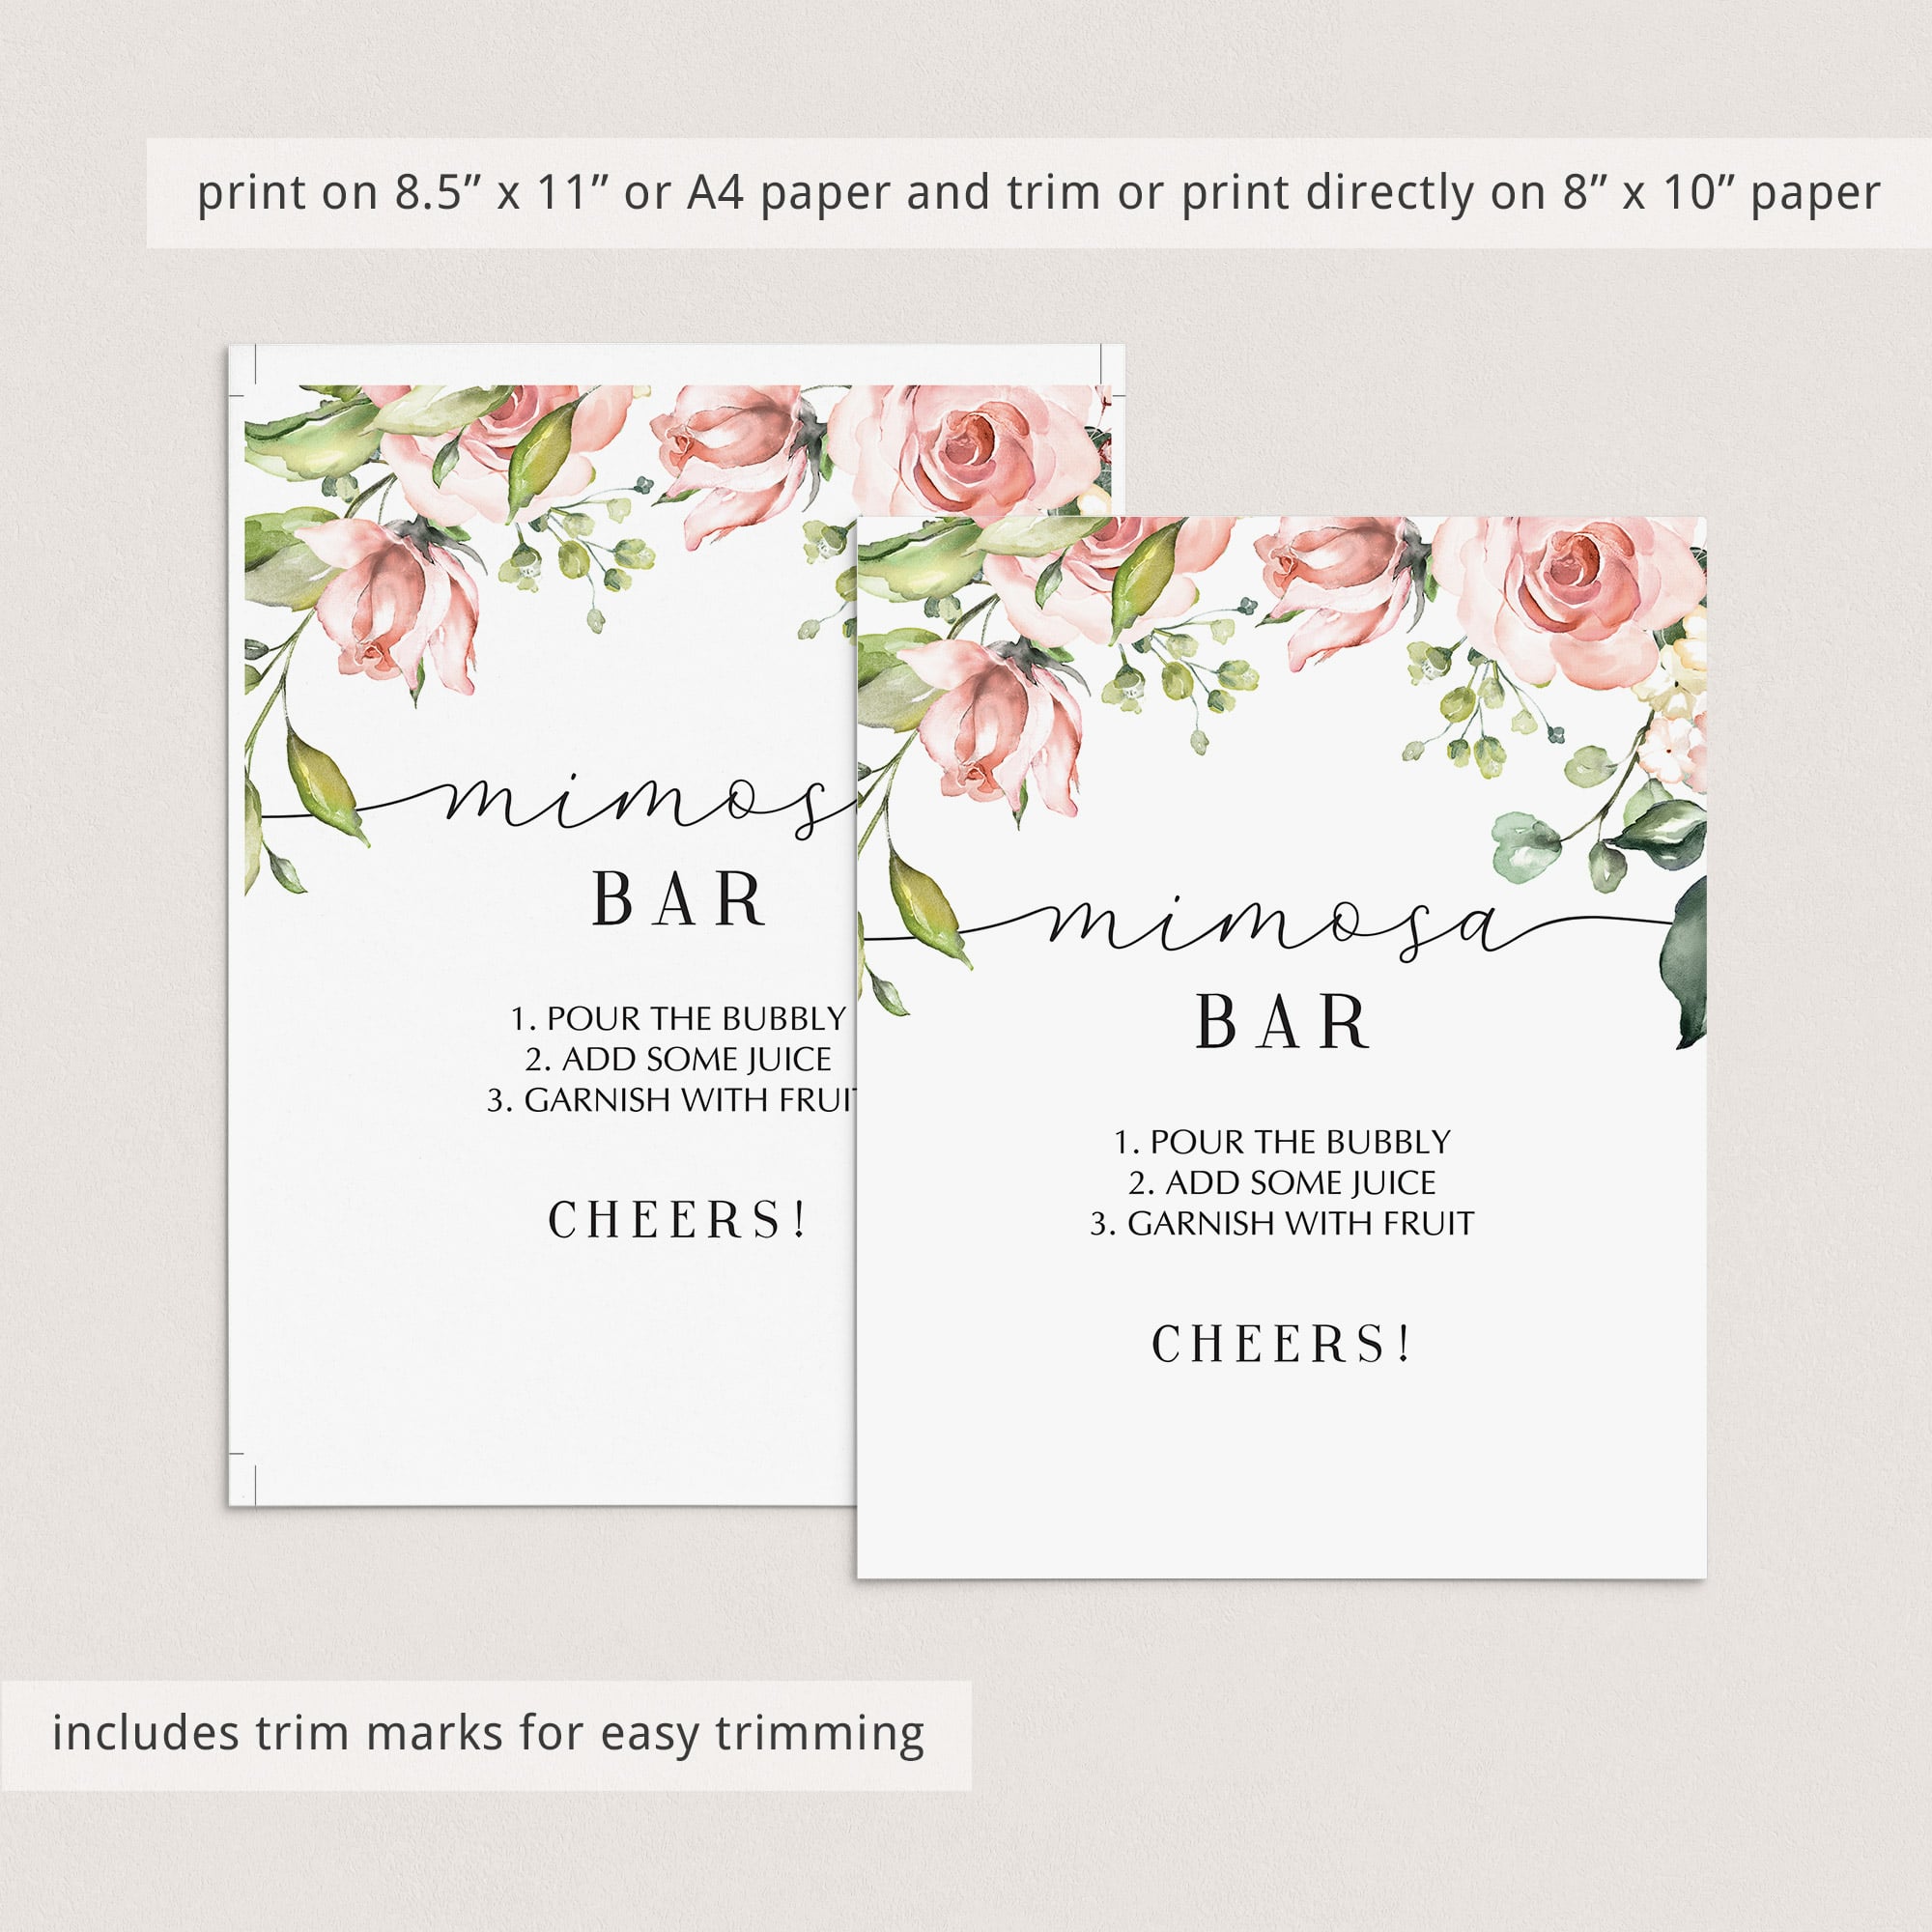 Floral table sign for mimosa bar by LittleSizzle